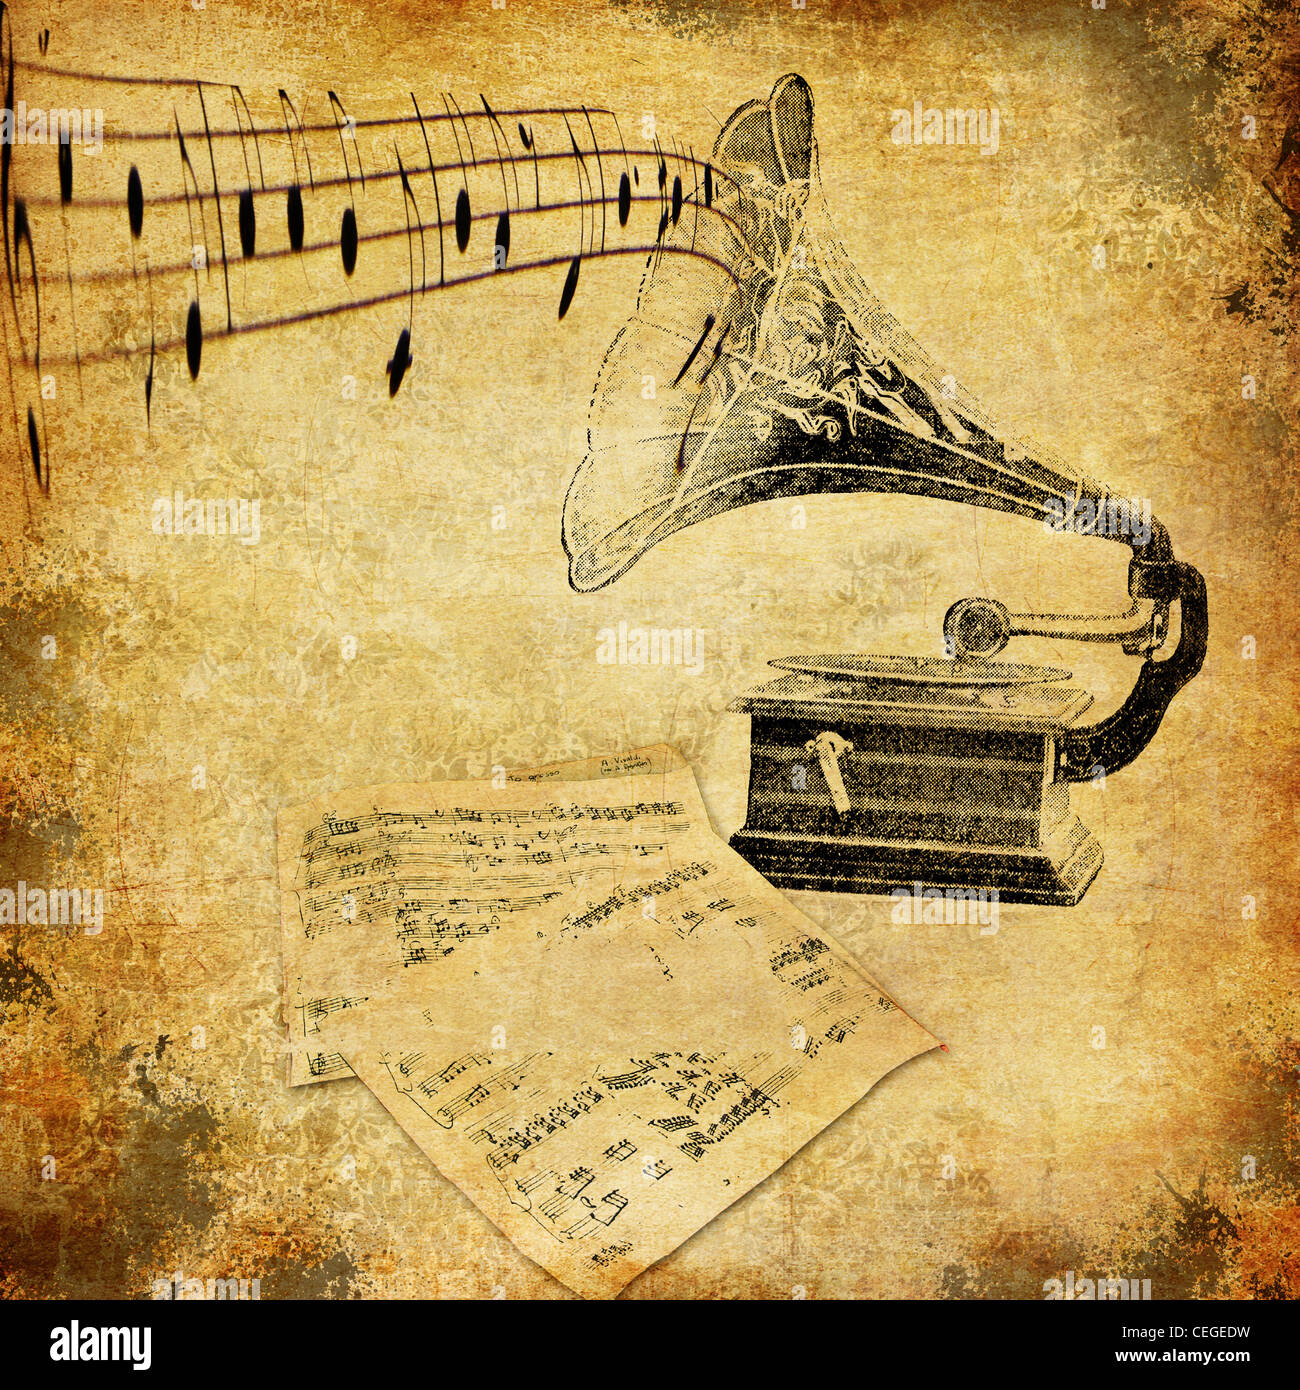 Gramophone nostalgia, retro wallpaper with grunge effects and music notes. Stock Photo